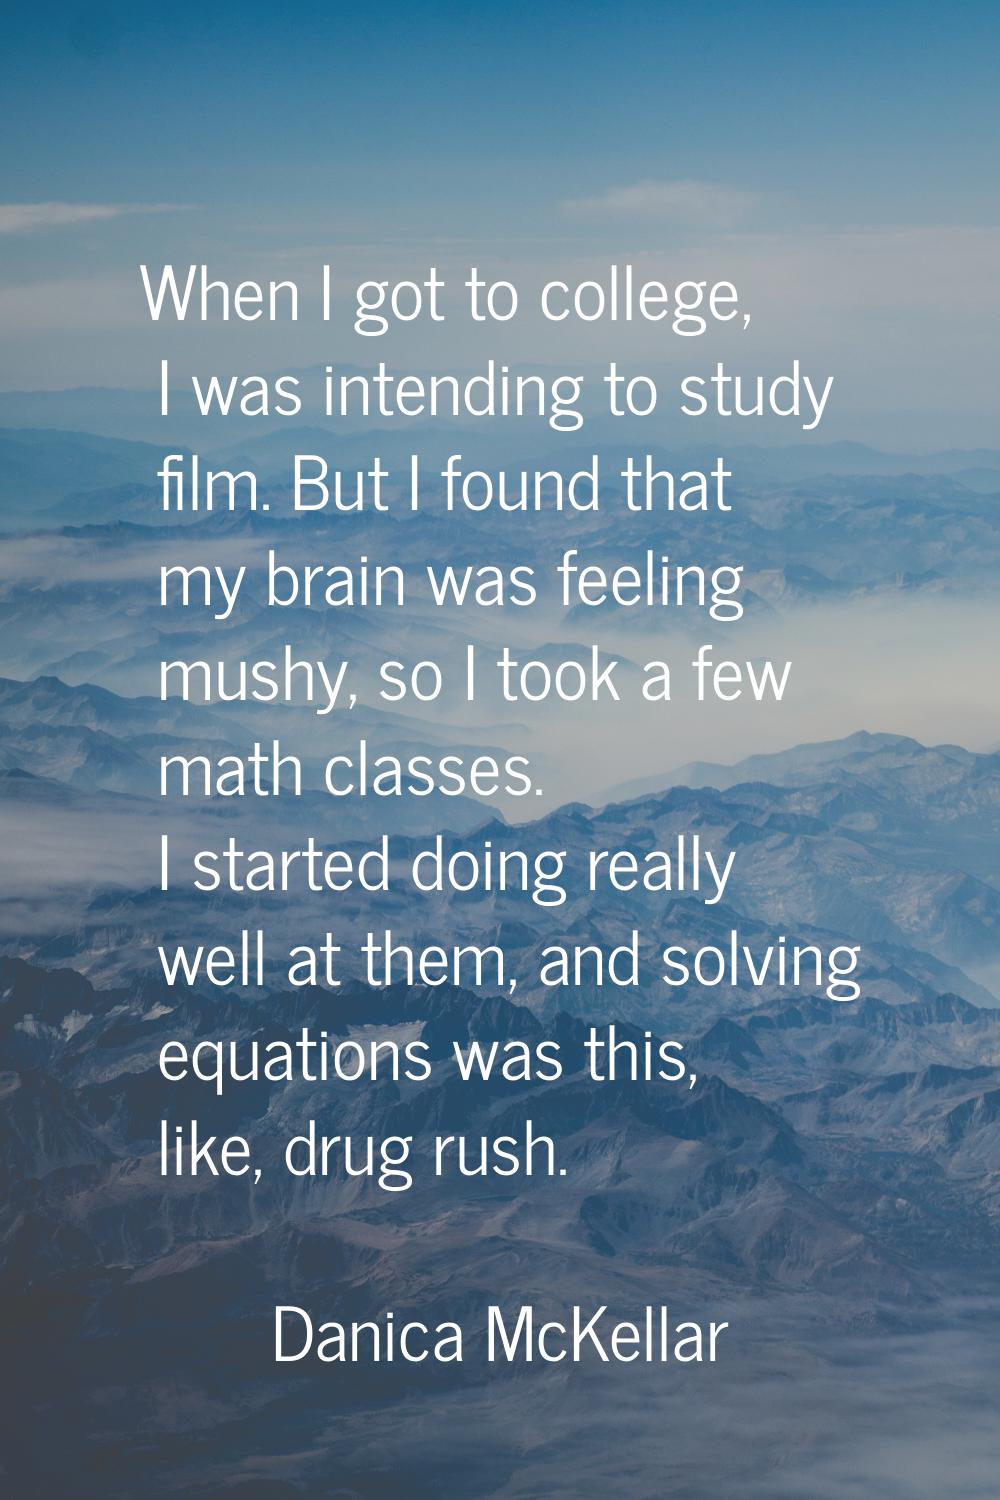 When I got to college, I was intending to study film. But I found that my brain was feeling mushy, 